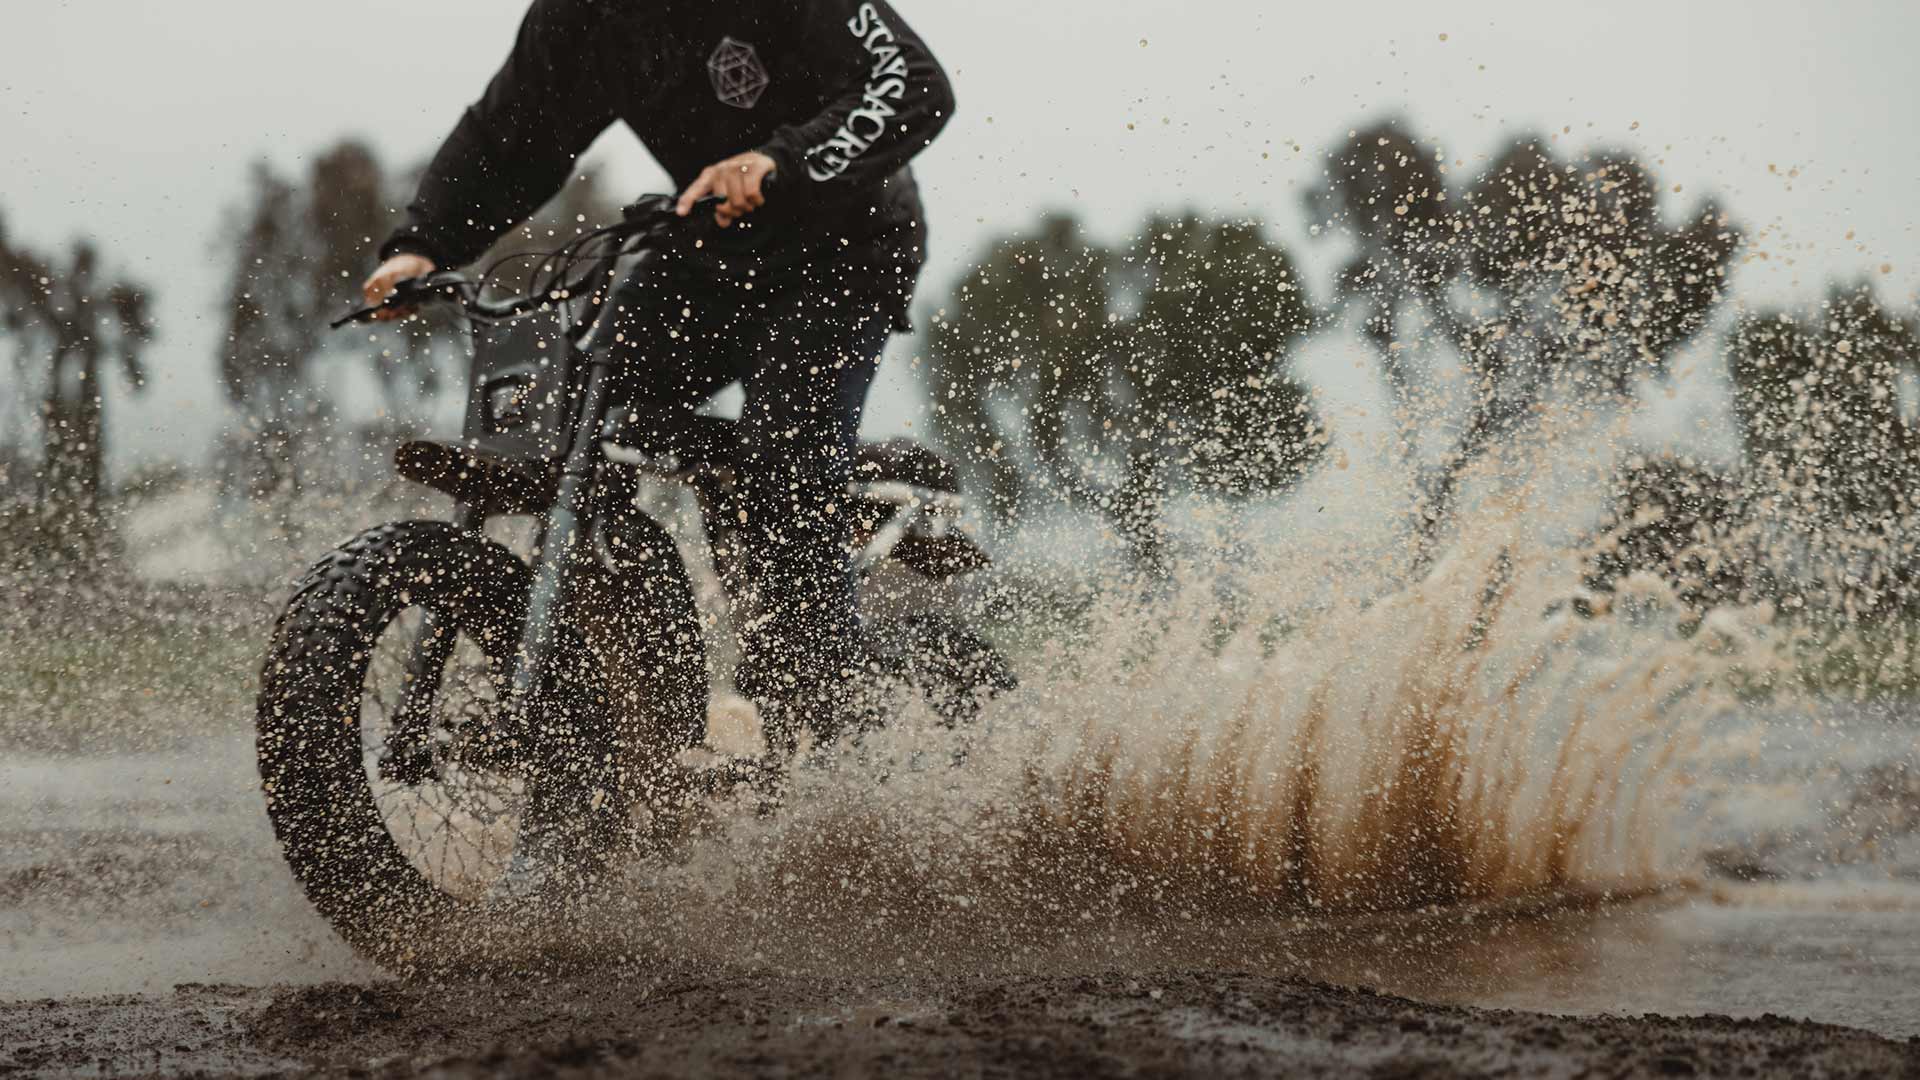 The Super73-R Adventure Series ebike riding through the mud and kicking up water